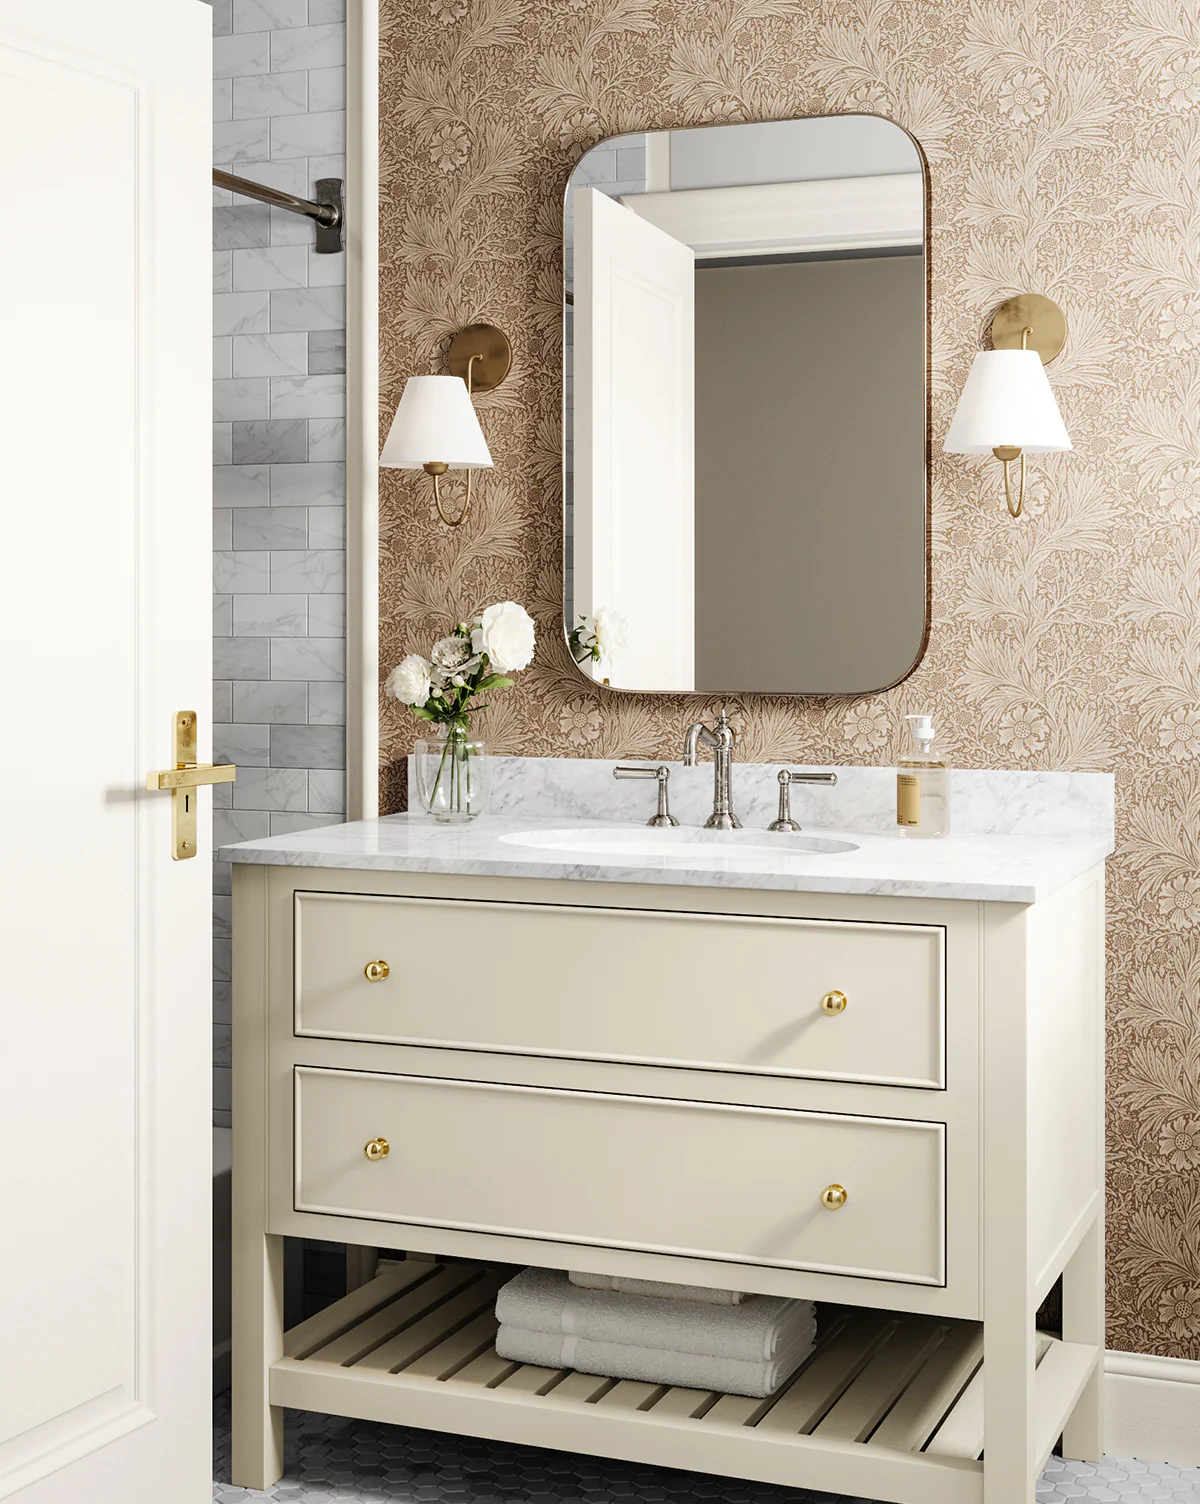 Rounded off rectangular mirror hanging above a bathroom vanity
